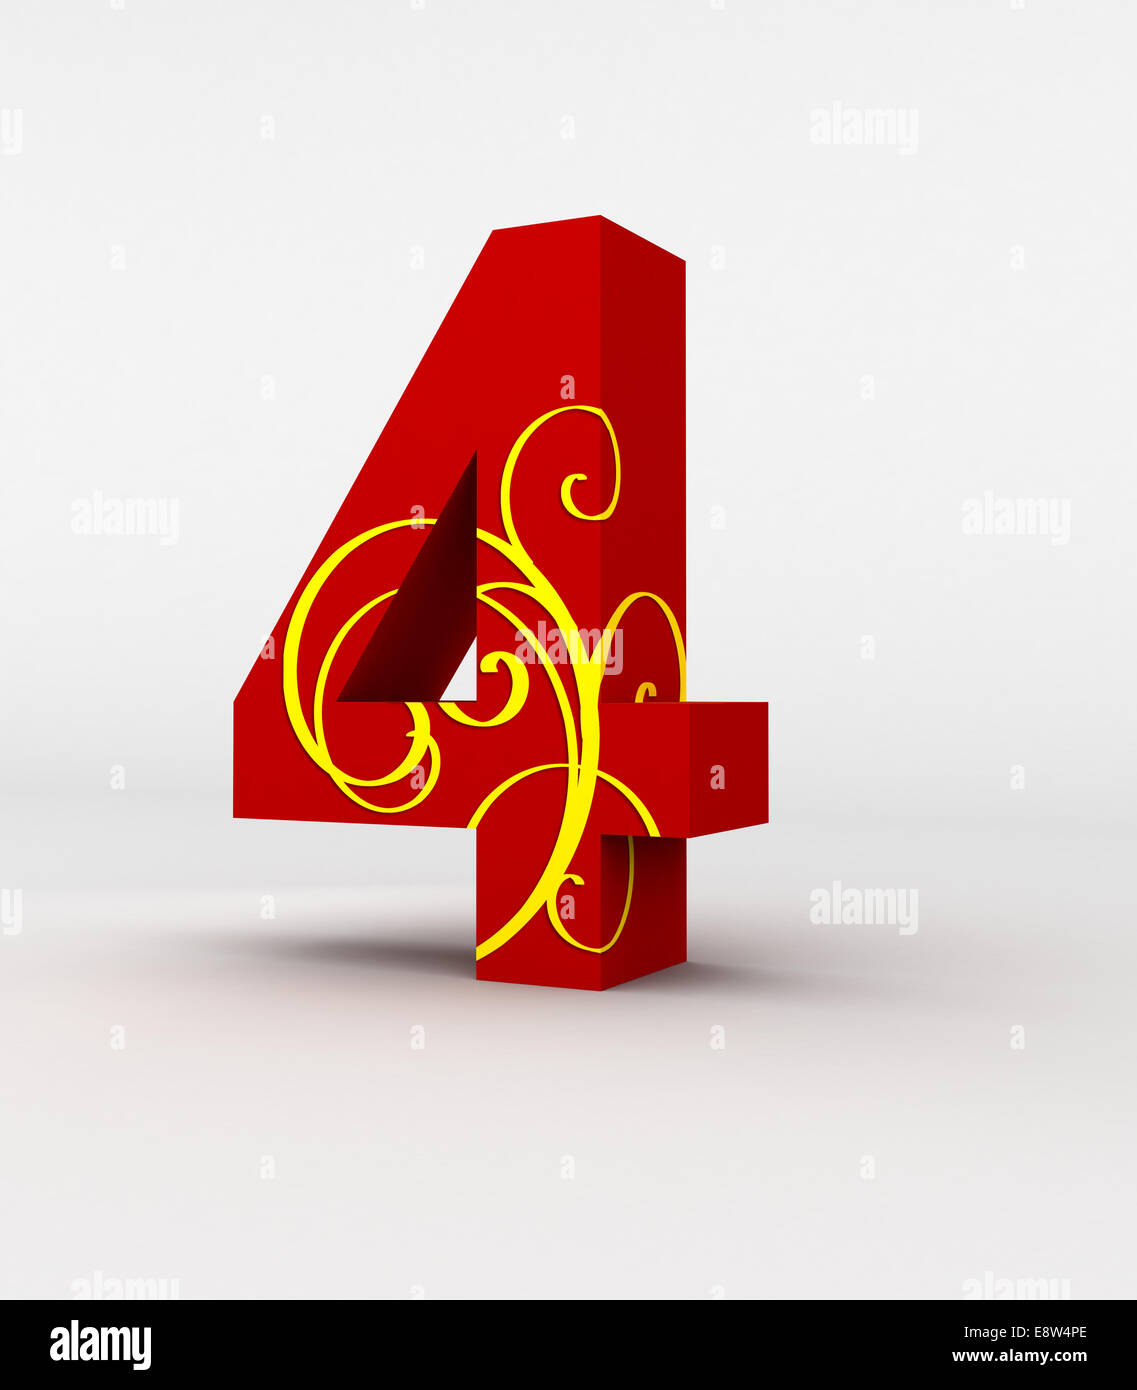 red number 4 decorated by yellow fashion pattern, isolated with white background. Stock Photo